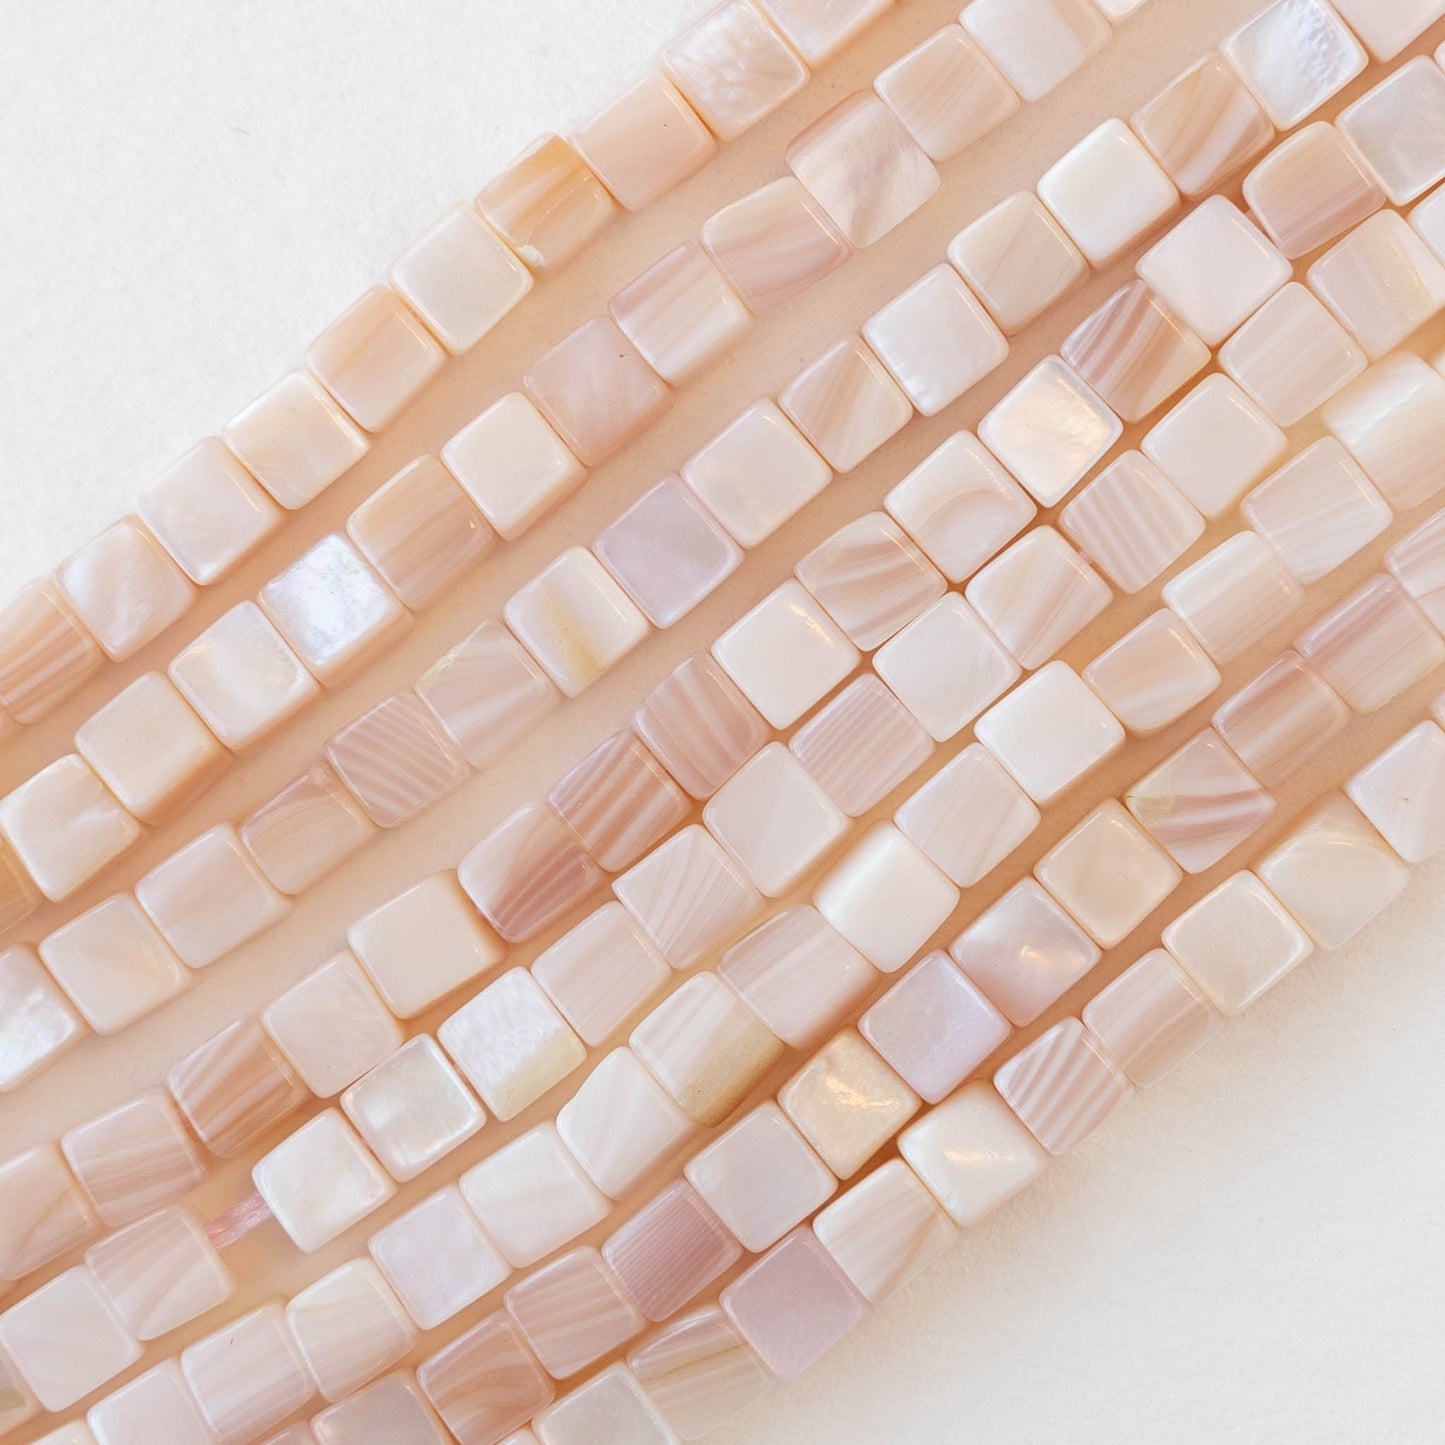 4mm Mother of Pearl Cube Beads - 8 inches